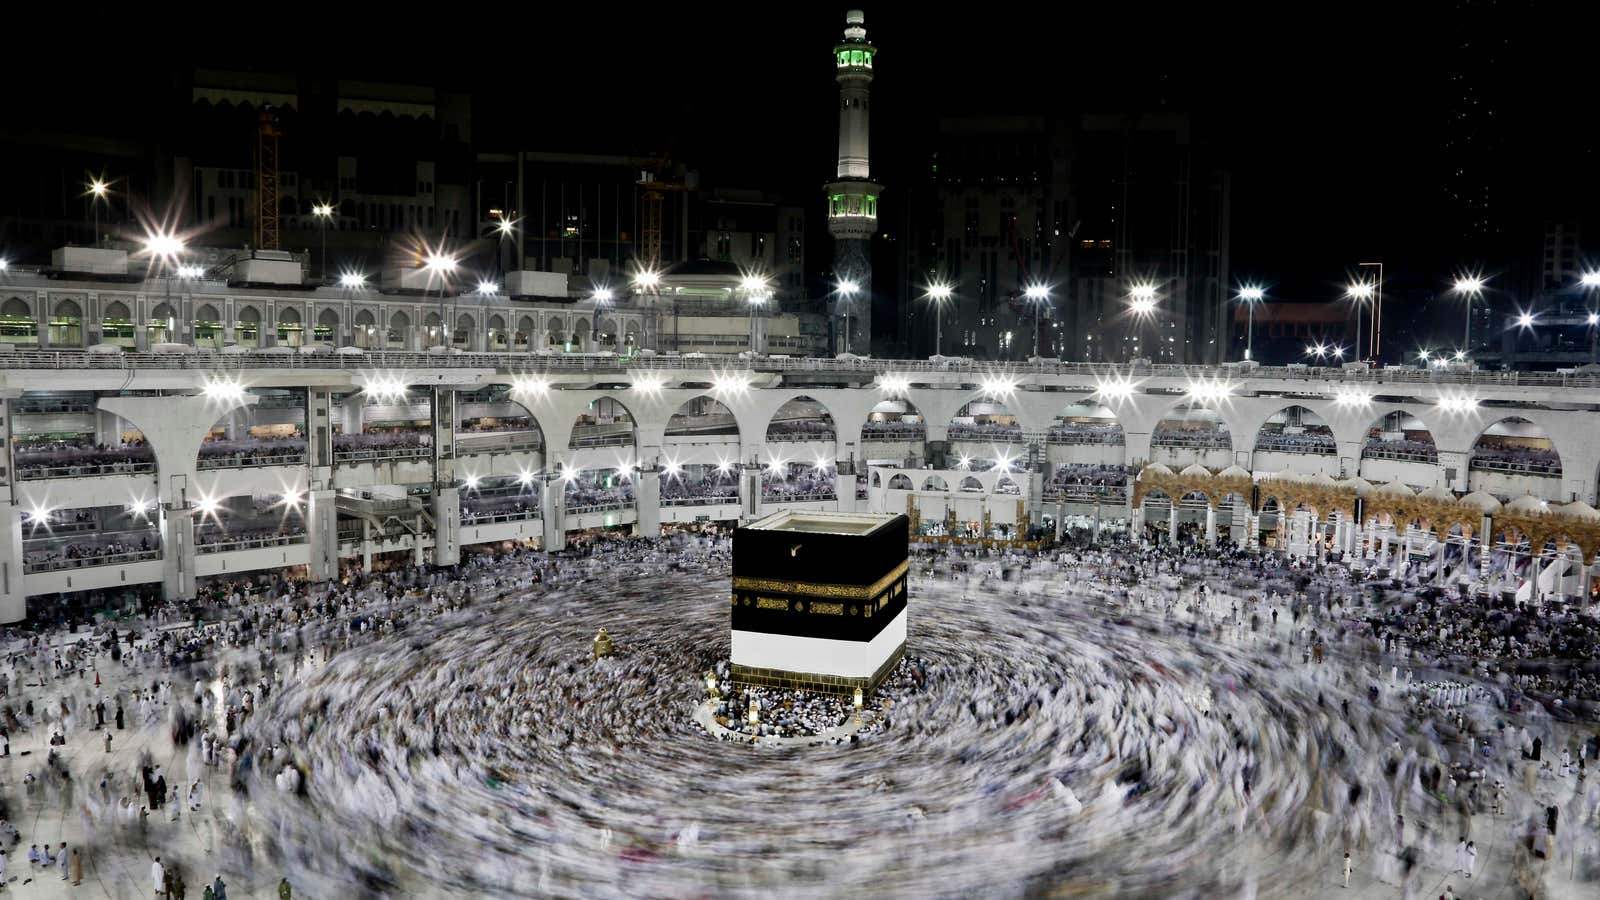 About 1.5 million people from 150 countries attended the 2016 pilgrimage in Mecca.